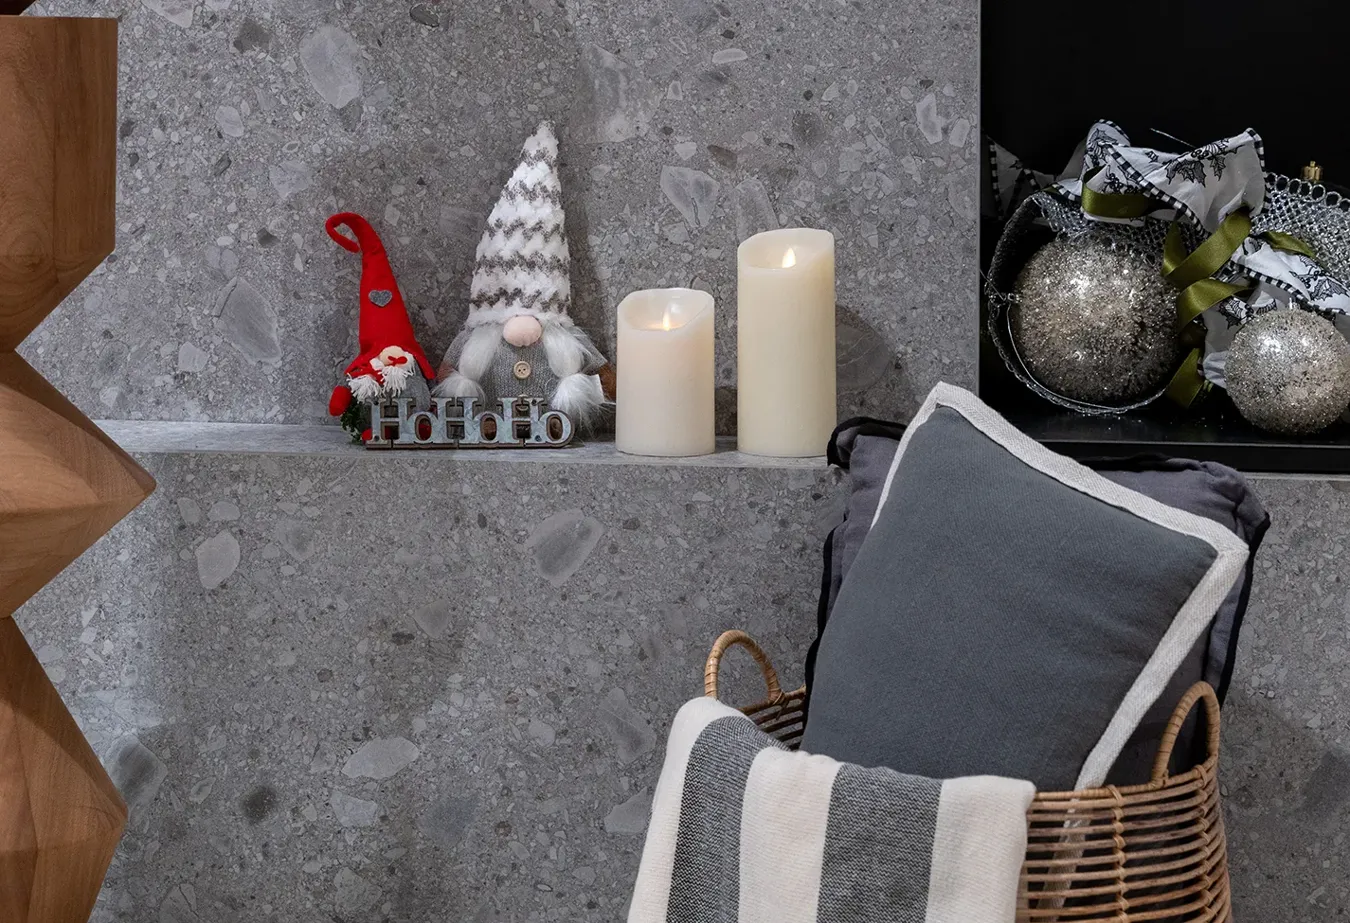 Christmas in style: harmonious festive designs with indoor tiles and decorations